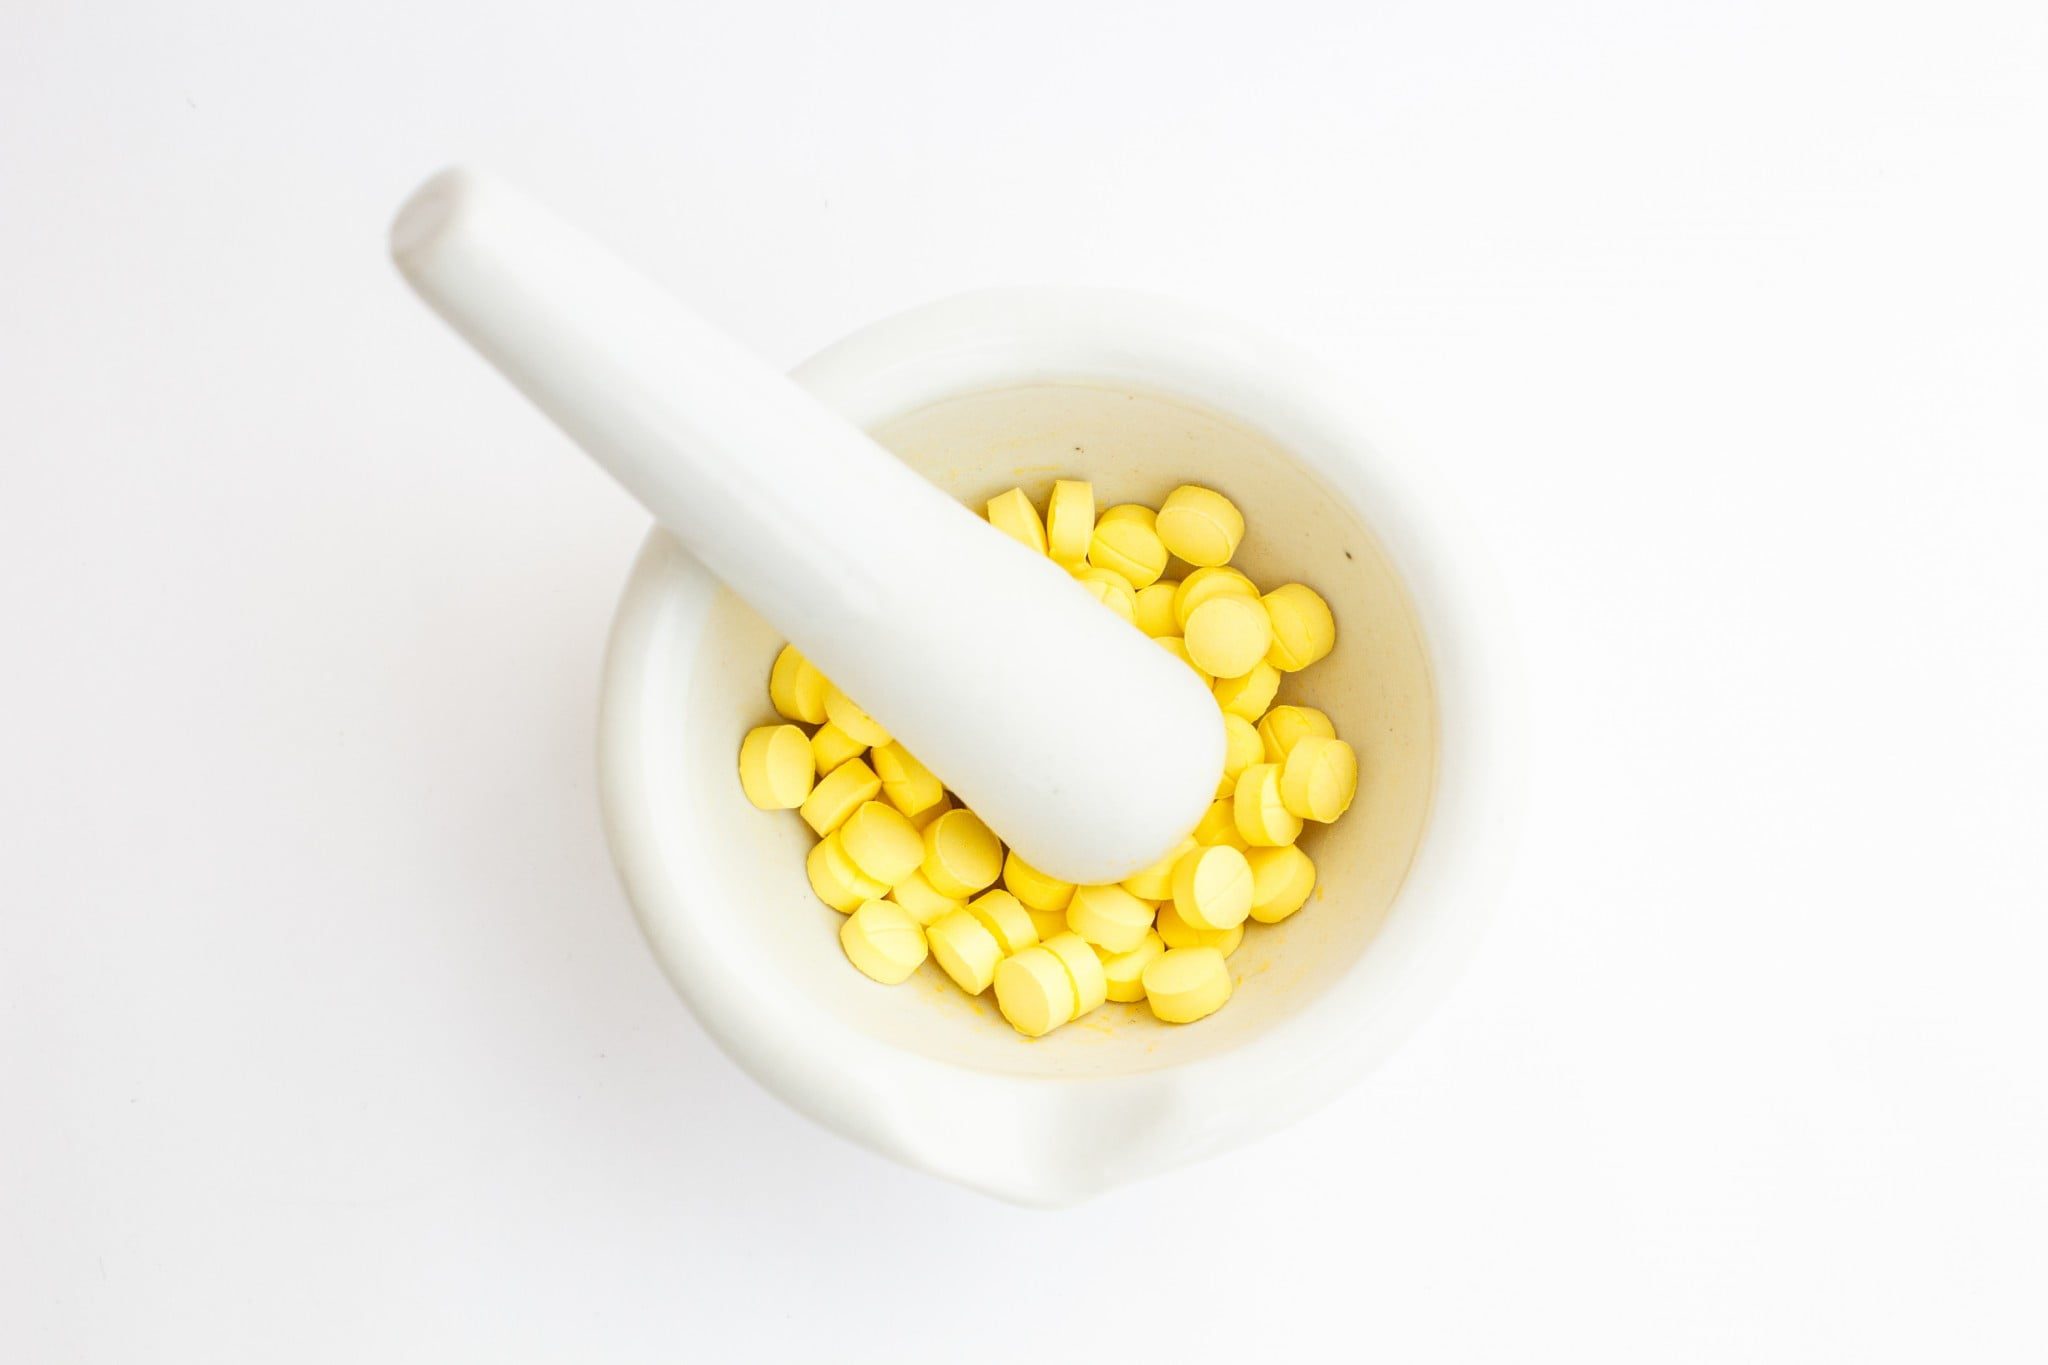 yellow pills in mortar with pestle for crushing medicines